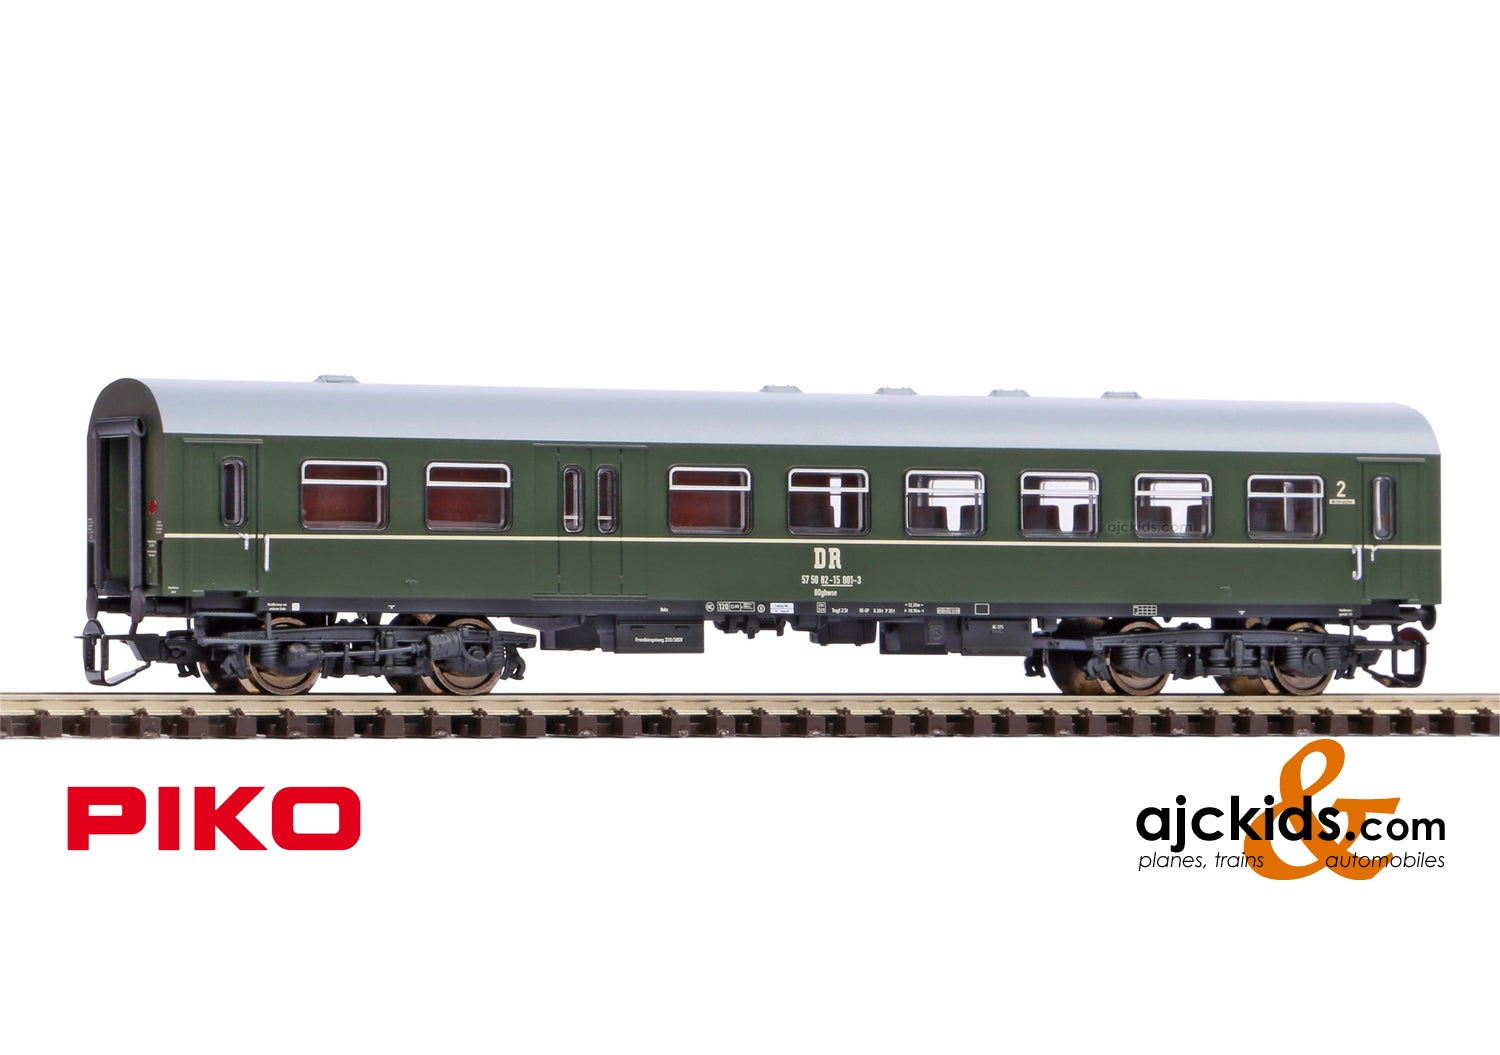 Piko 47606 - Reko Coach 2nd Cl. BDghw w/Baggage DR III